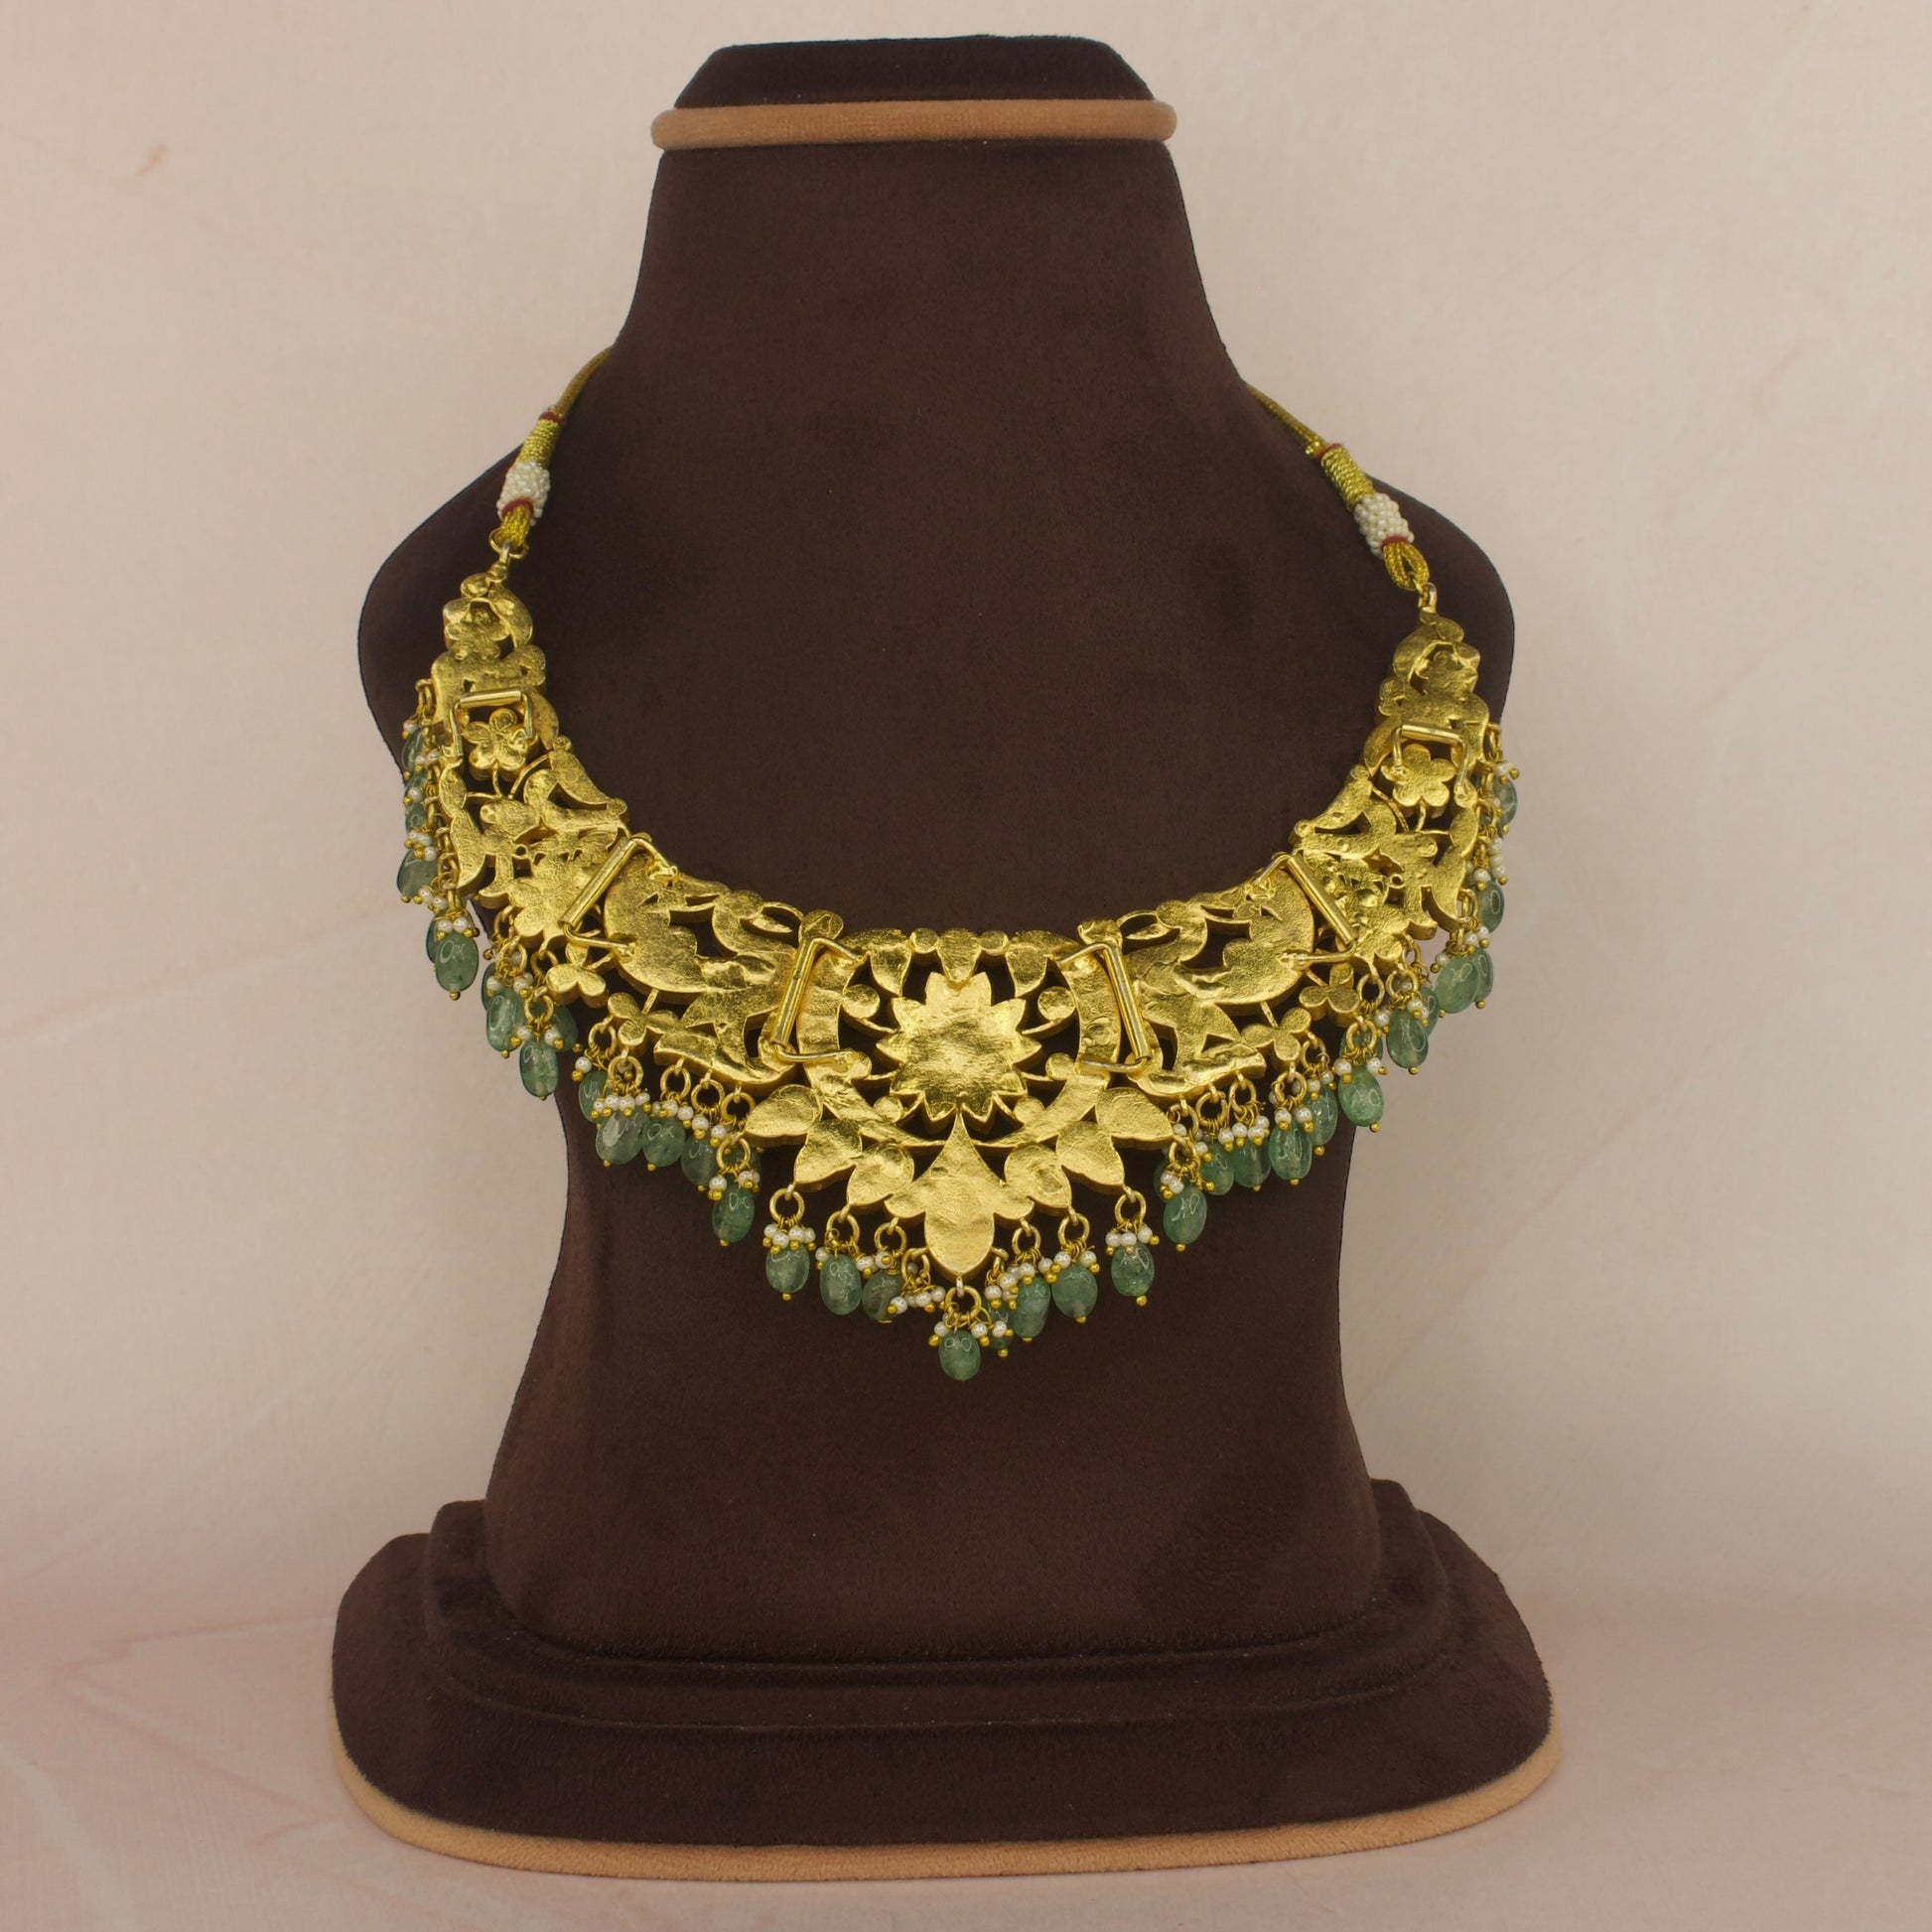 This Necklace is 22k Gold plated. It has floral motifs all over it and at the bottom of the necklace we have Russian emerald beads